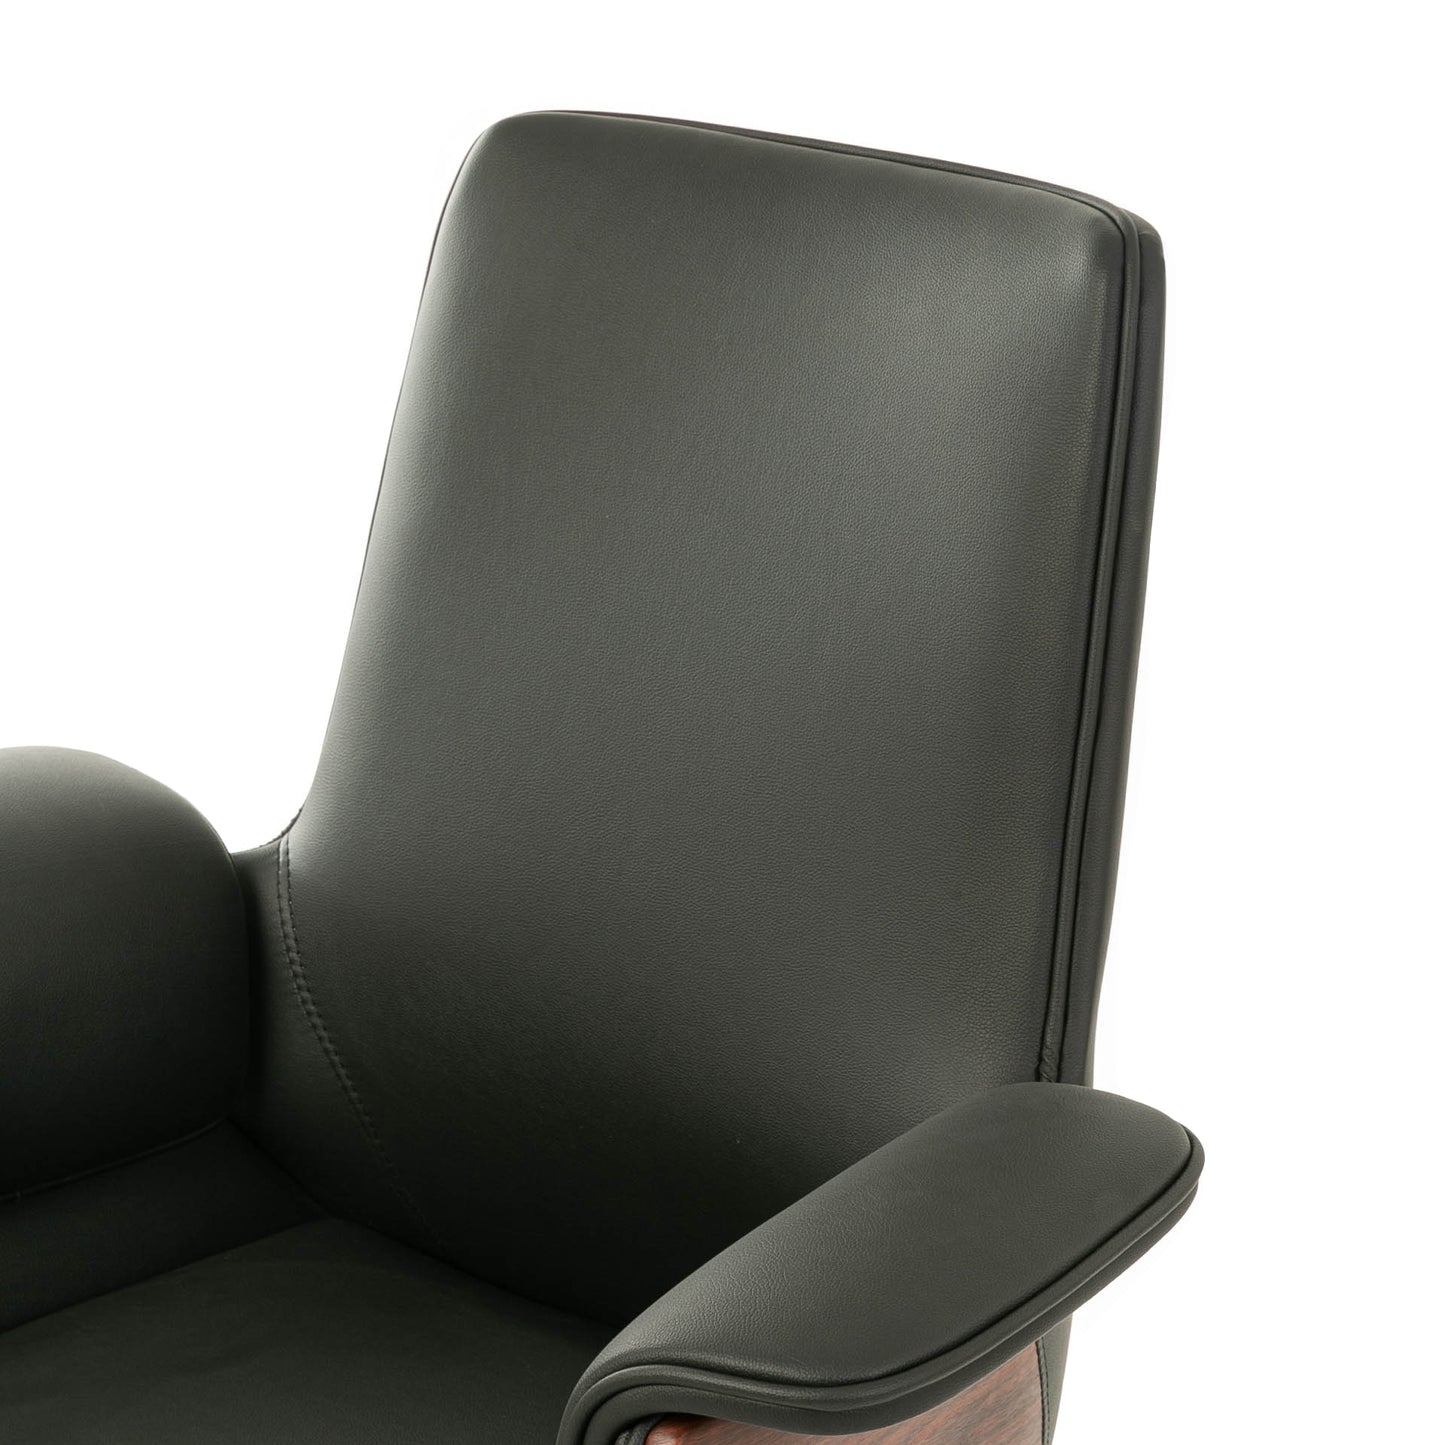 Cosmo Task Chair - ContractWorld Furniture